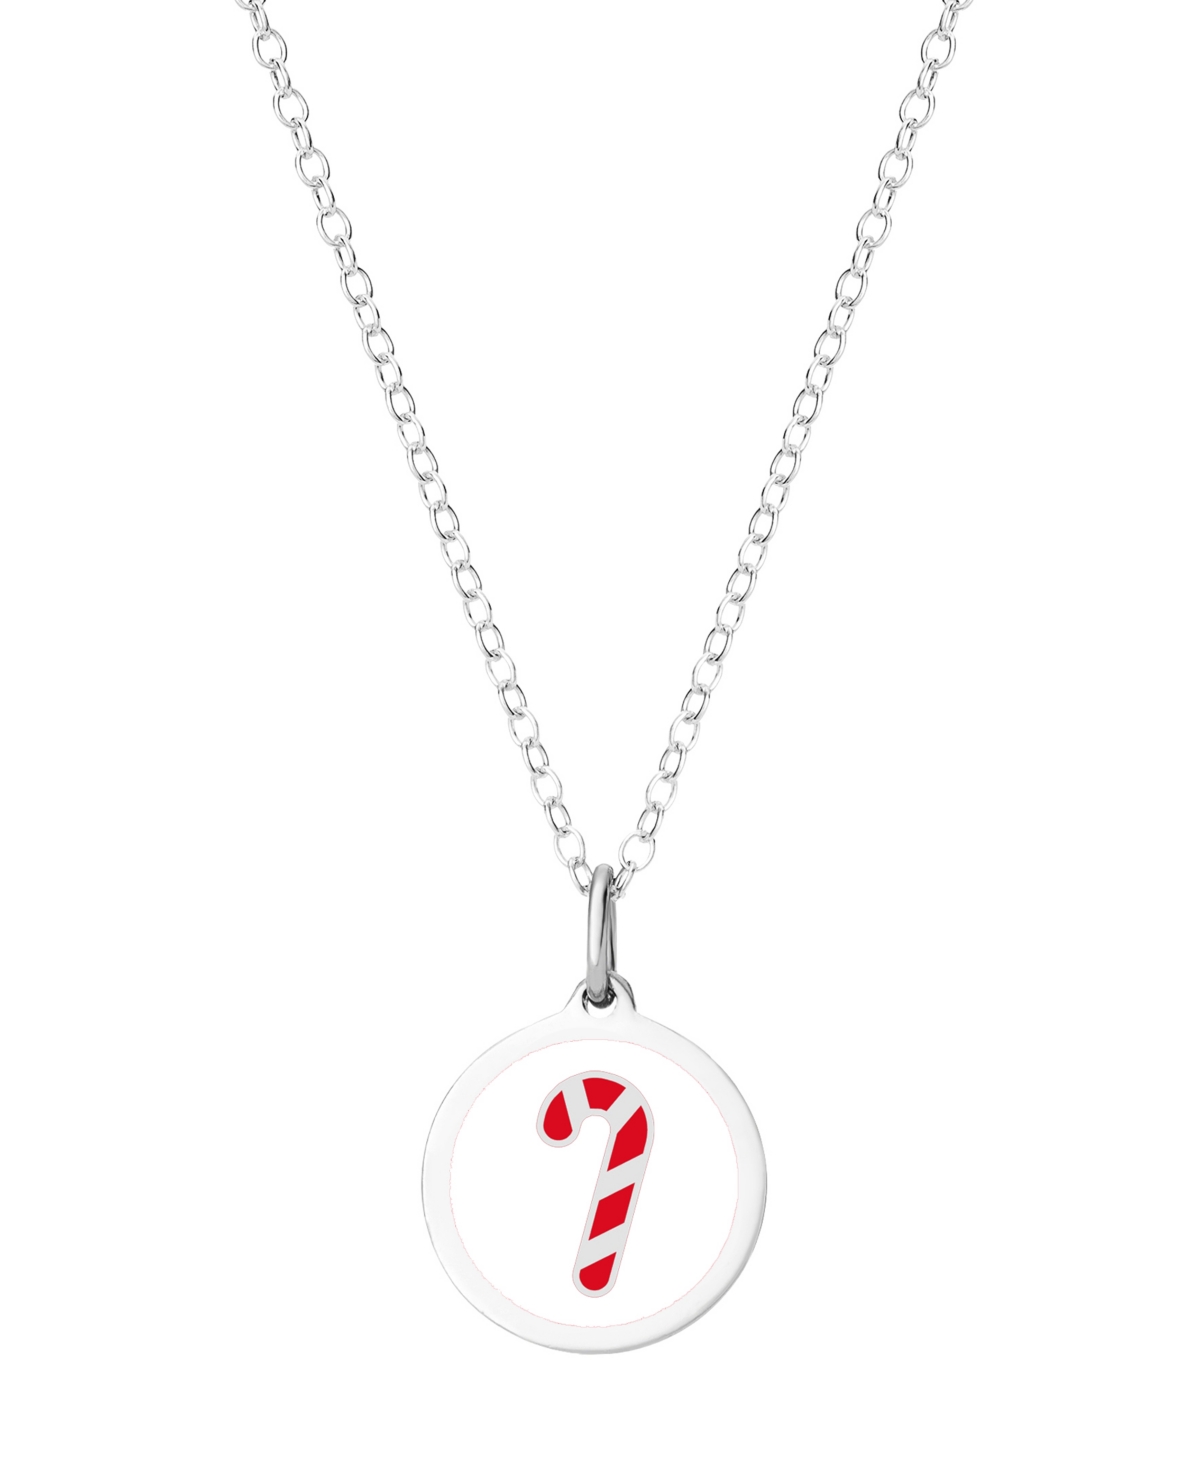 Candy Cane Necklace in Sterling Silver - White